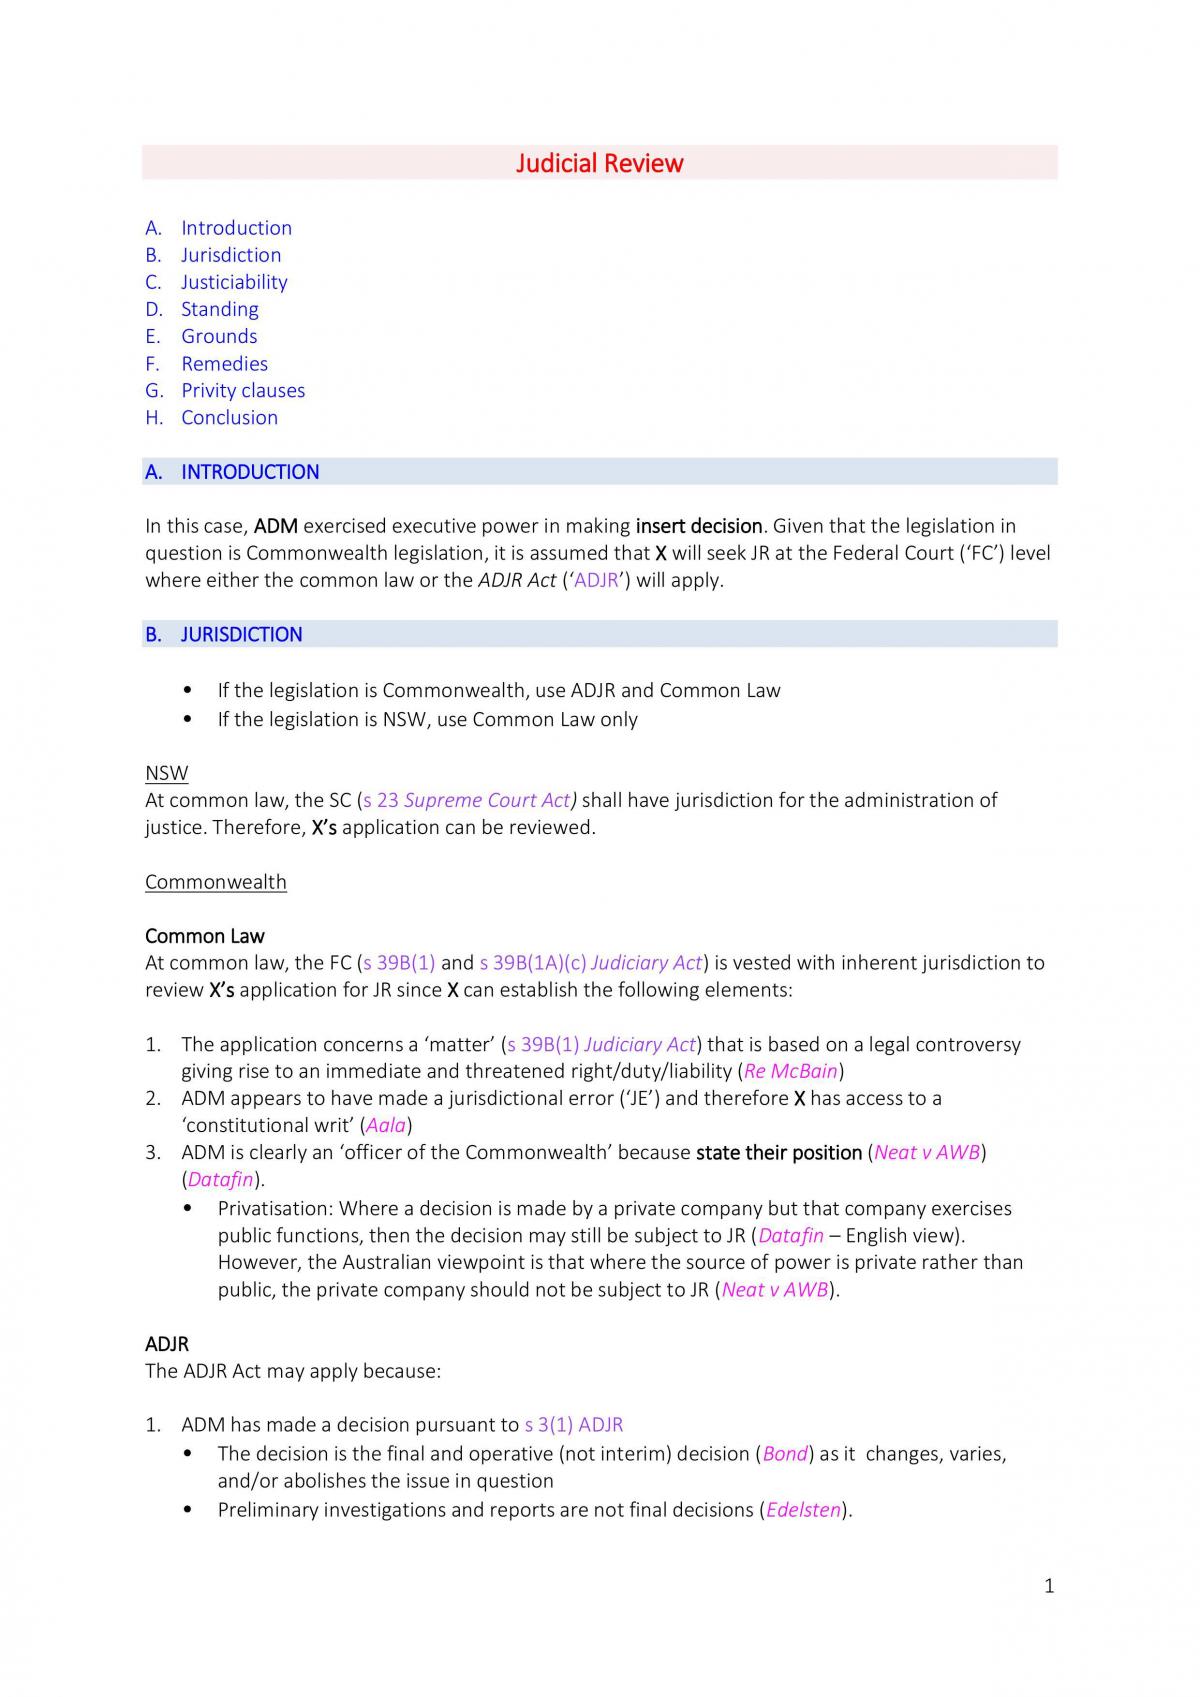 HD Admin Law Notes - Page 1